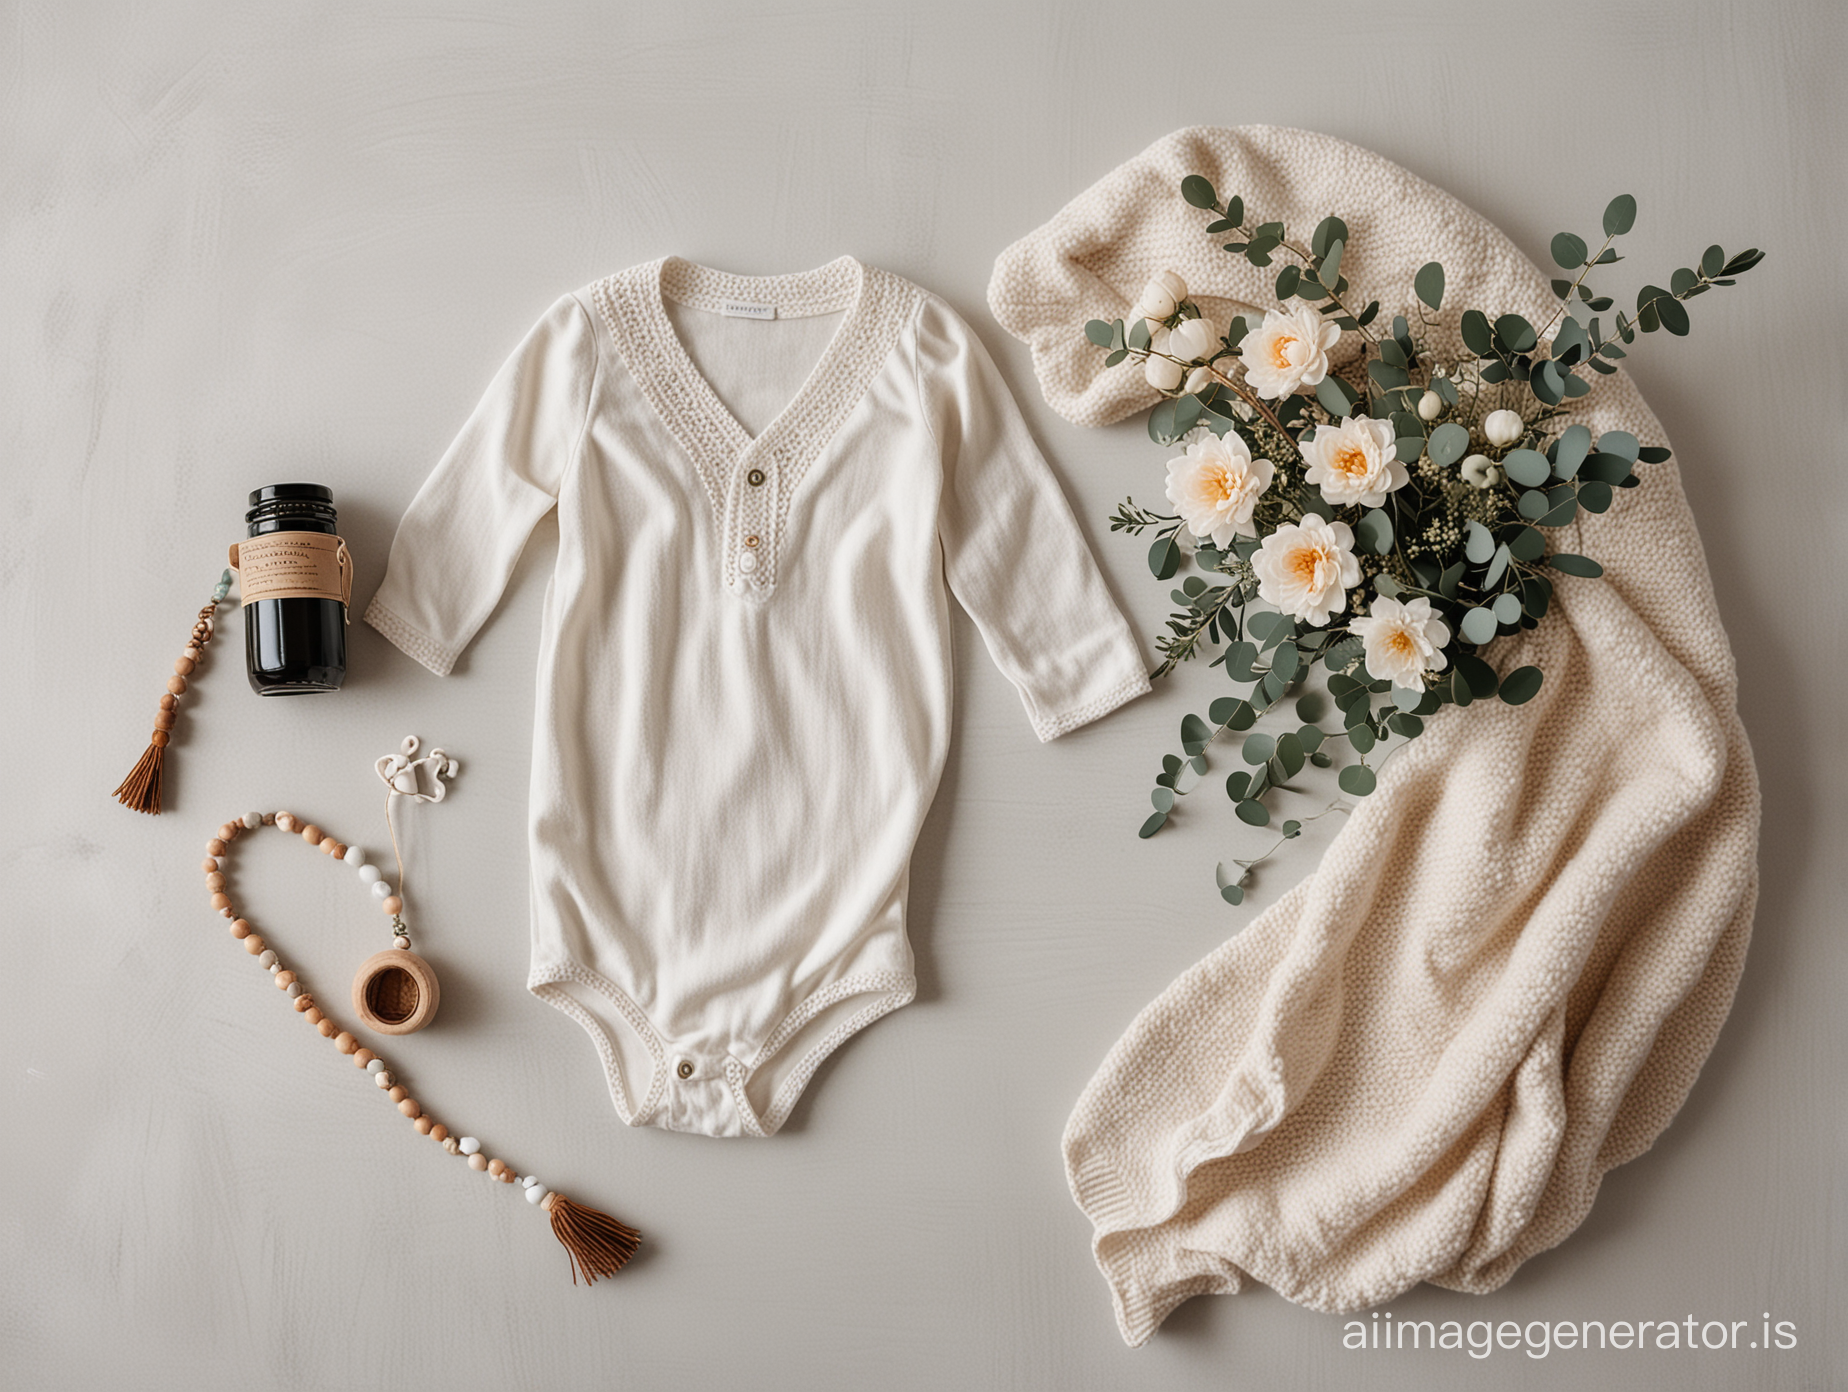 A minimalistic flatlay composition featuring a plush blanket arranged elegantly on a clean white surface, juxtaposed with a chalkboard, a delicate baby bodysuit, a whimsical rattle, tiny crochet booties, fresh flowers, aromatic eucalyptus branches, a wooden bottle, wooden bead necklace, and a soft plush toy, evoking a serene and tender atmosphere with muted earthy tones, captured beautifully with the timeless elegance of a Hasselblad camera.